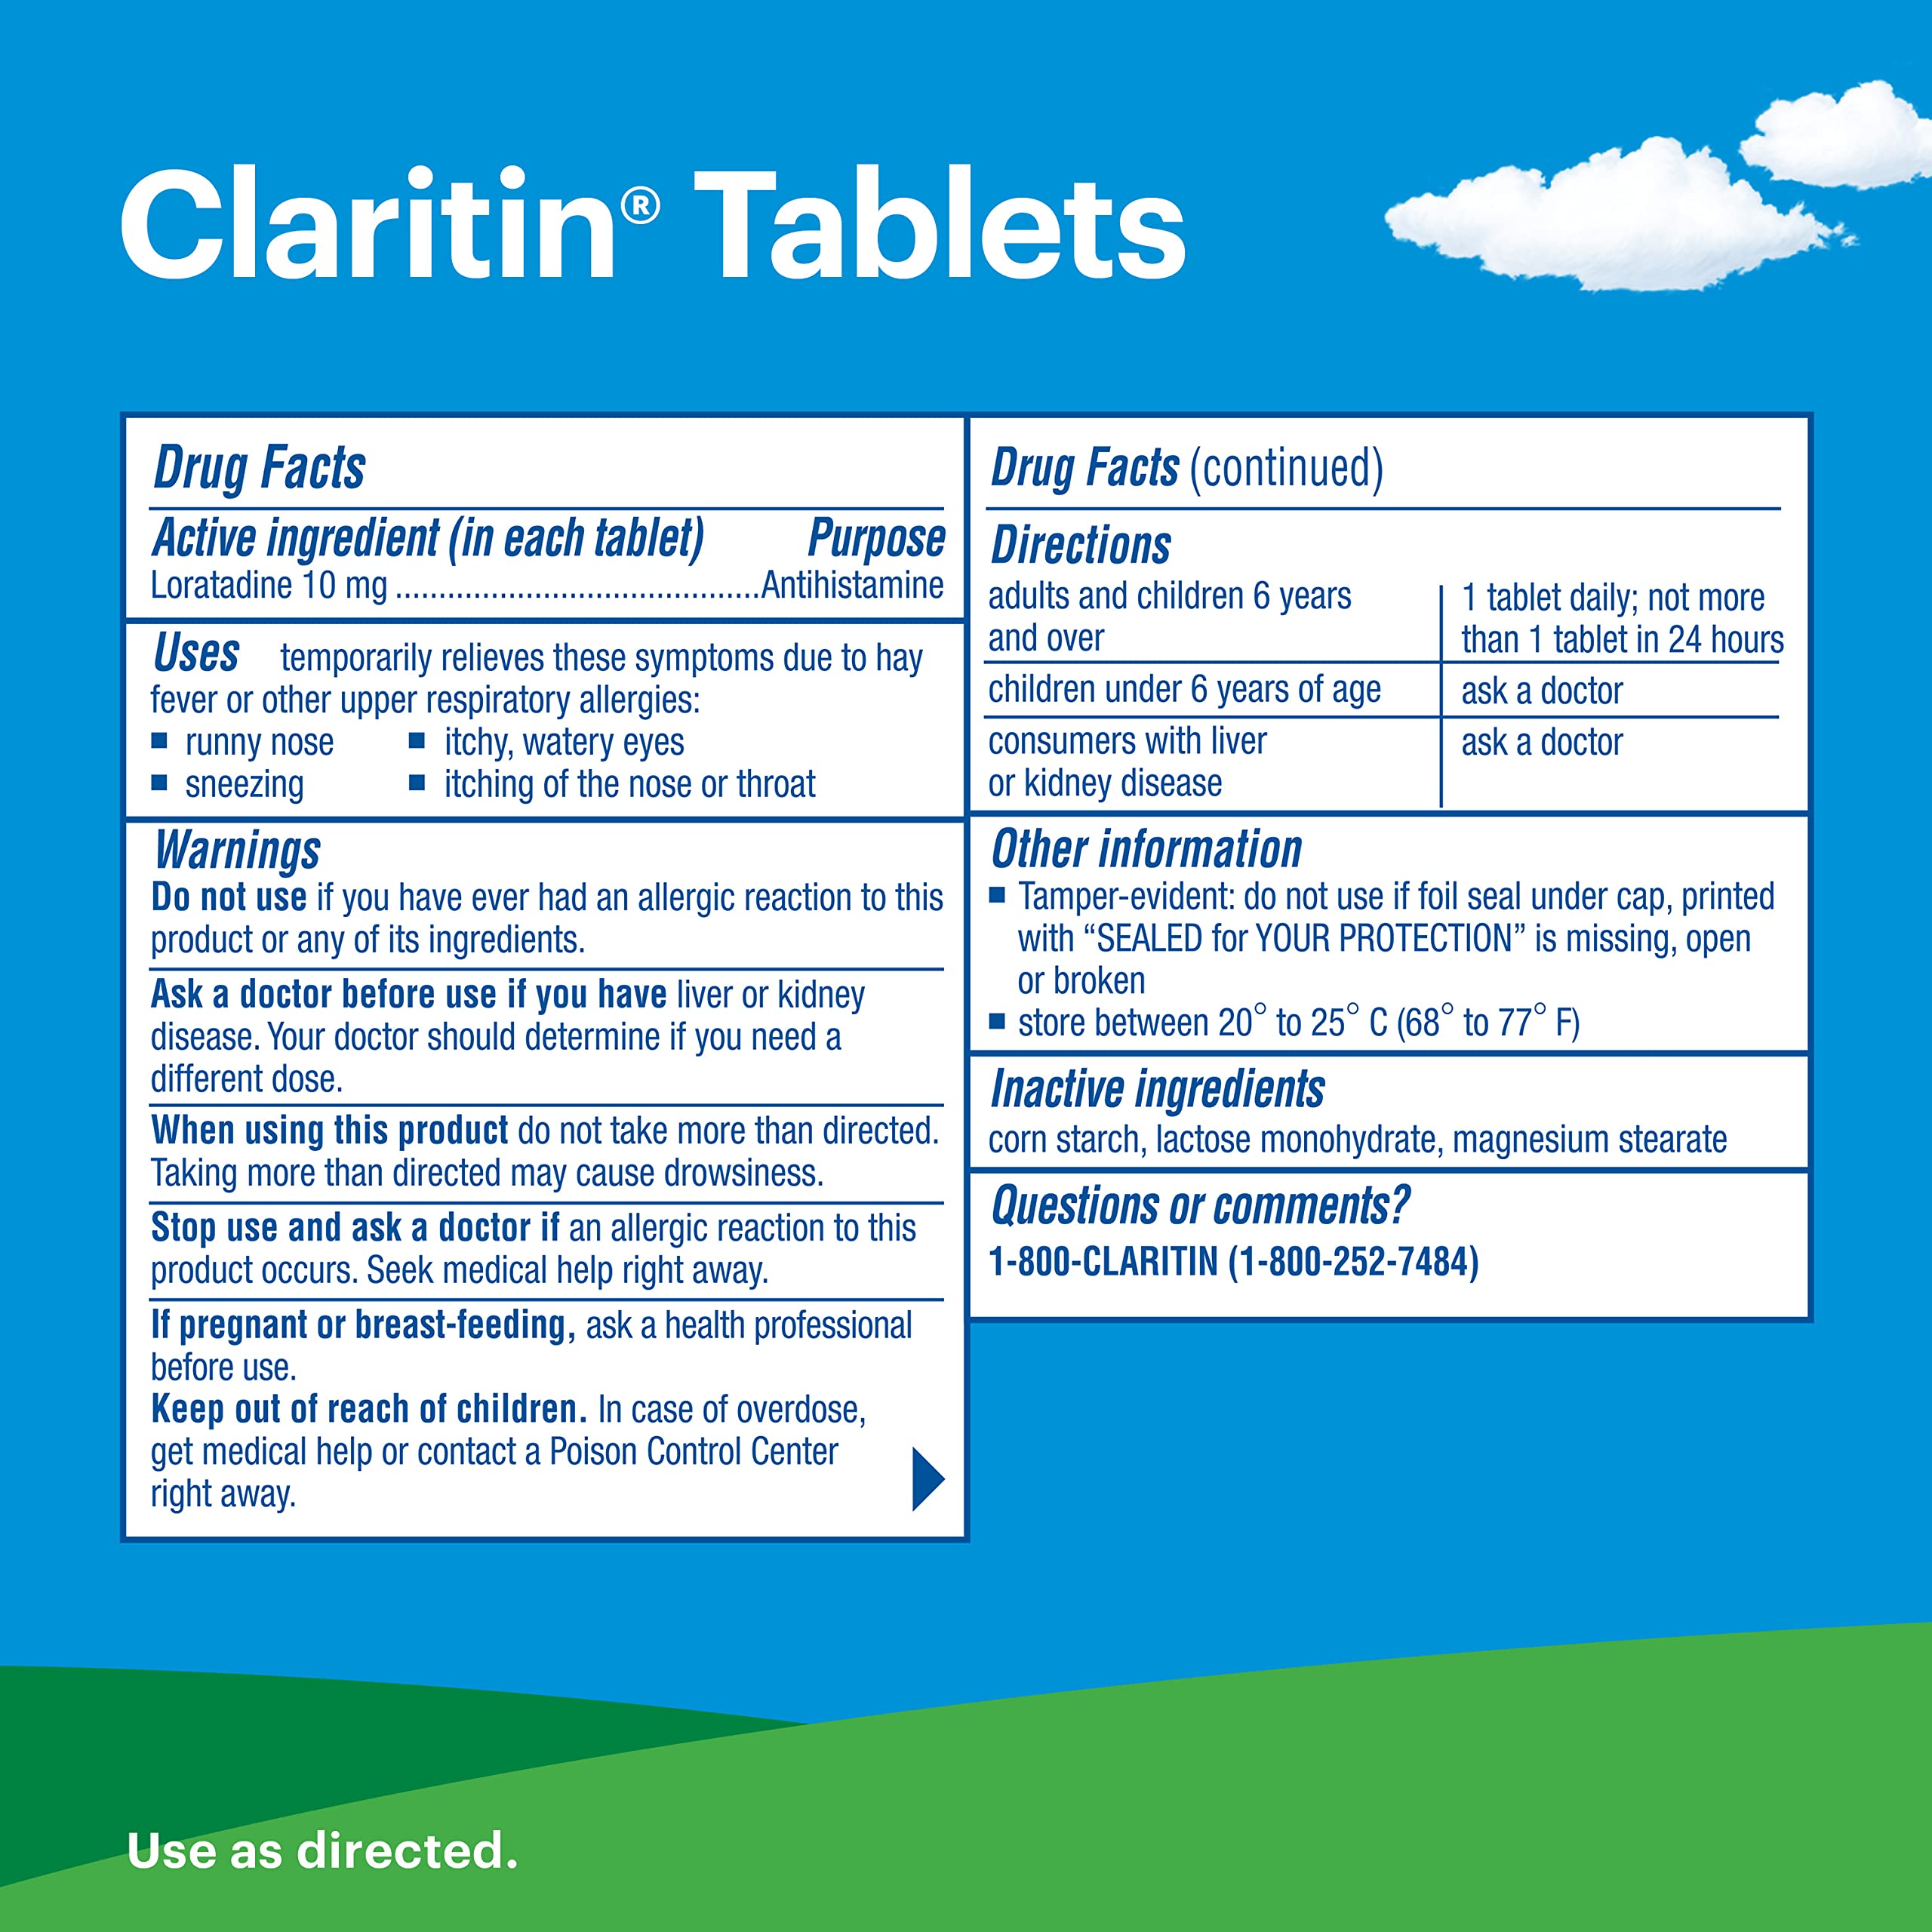 Claritin 24 Hour Allergy Medicine, Non-Drowsy Prescription Strength Allergy Relief, Loratadine Antihistamine Tablets For Over 200 Indoor and Outdoor Allergens, Adult Tablets, 100 Count (Pack of 1)